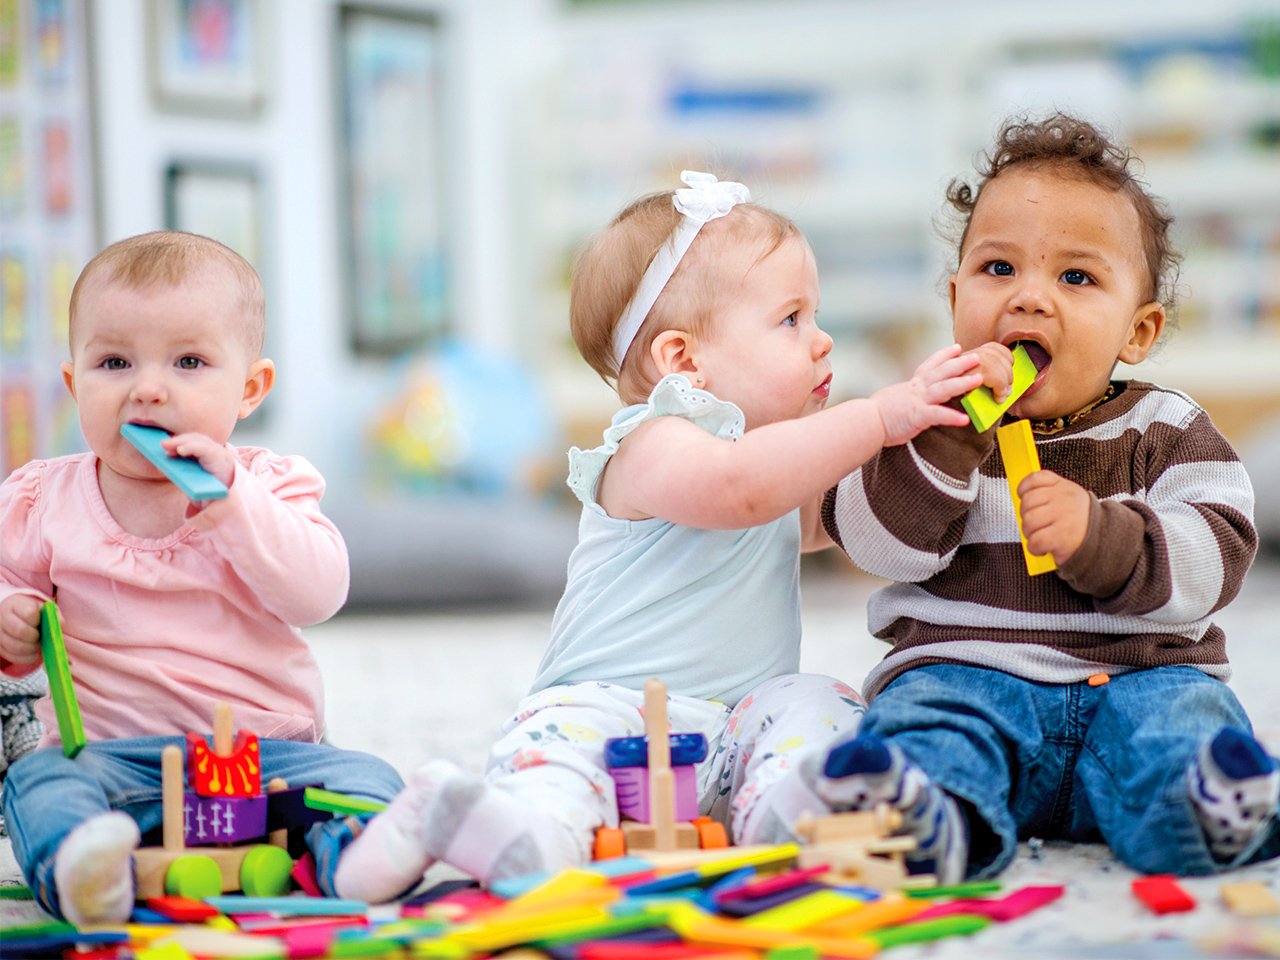 Child Care Classes For Daycare